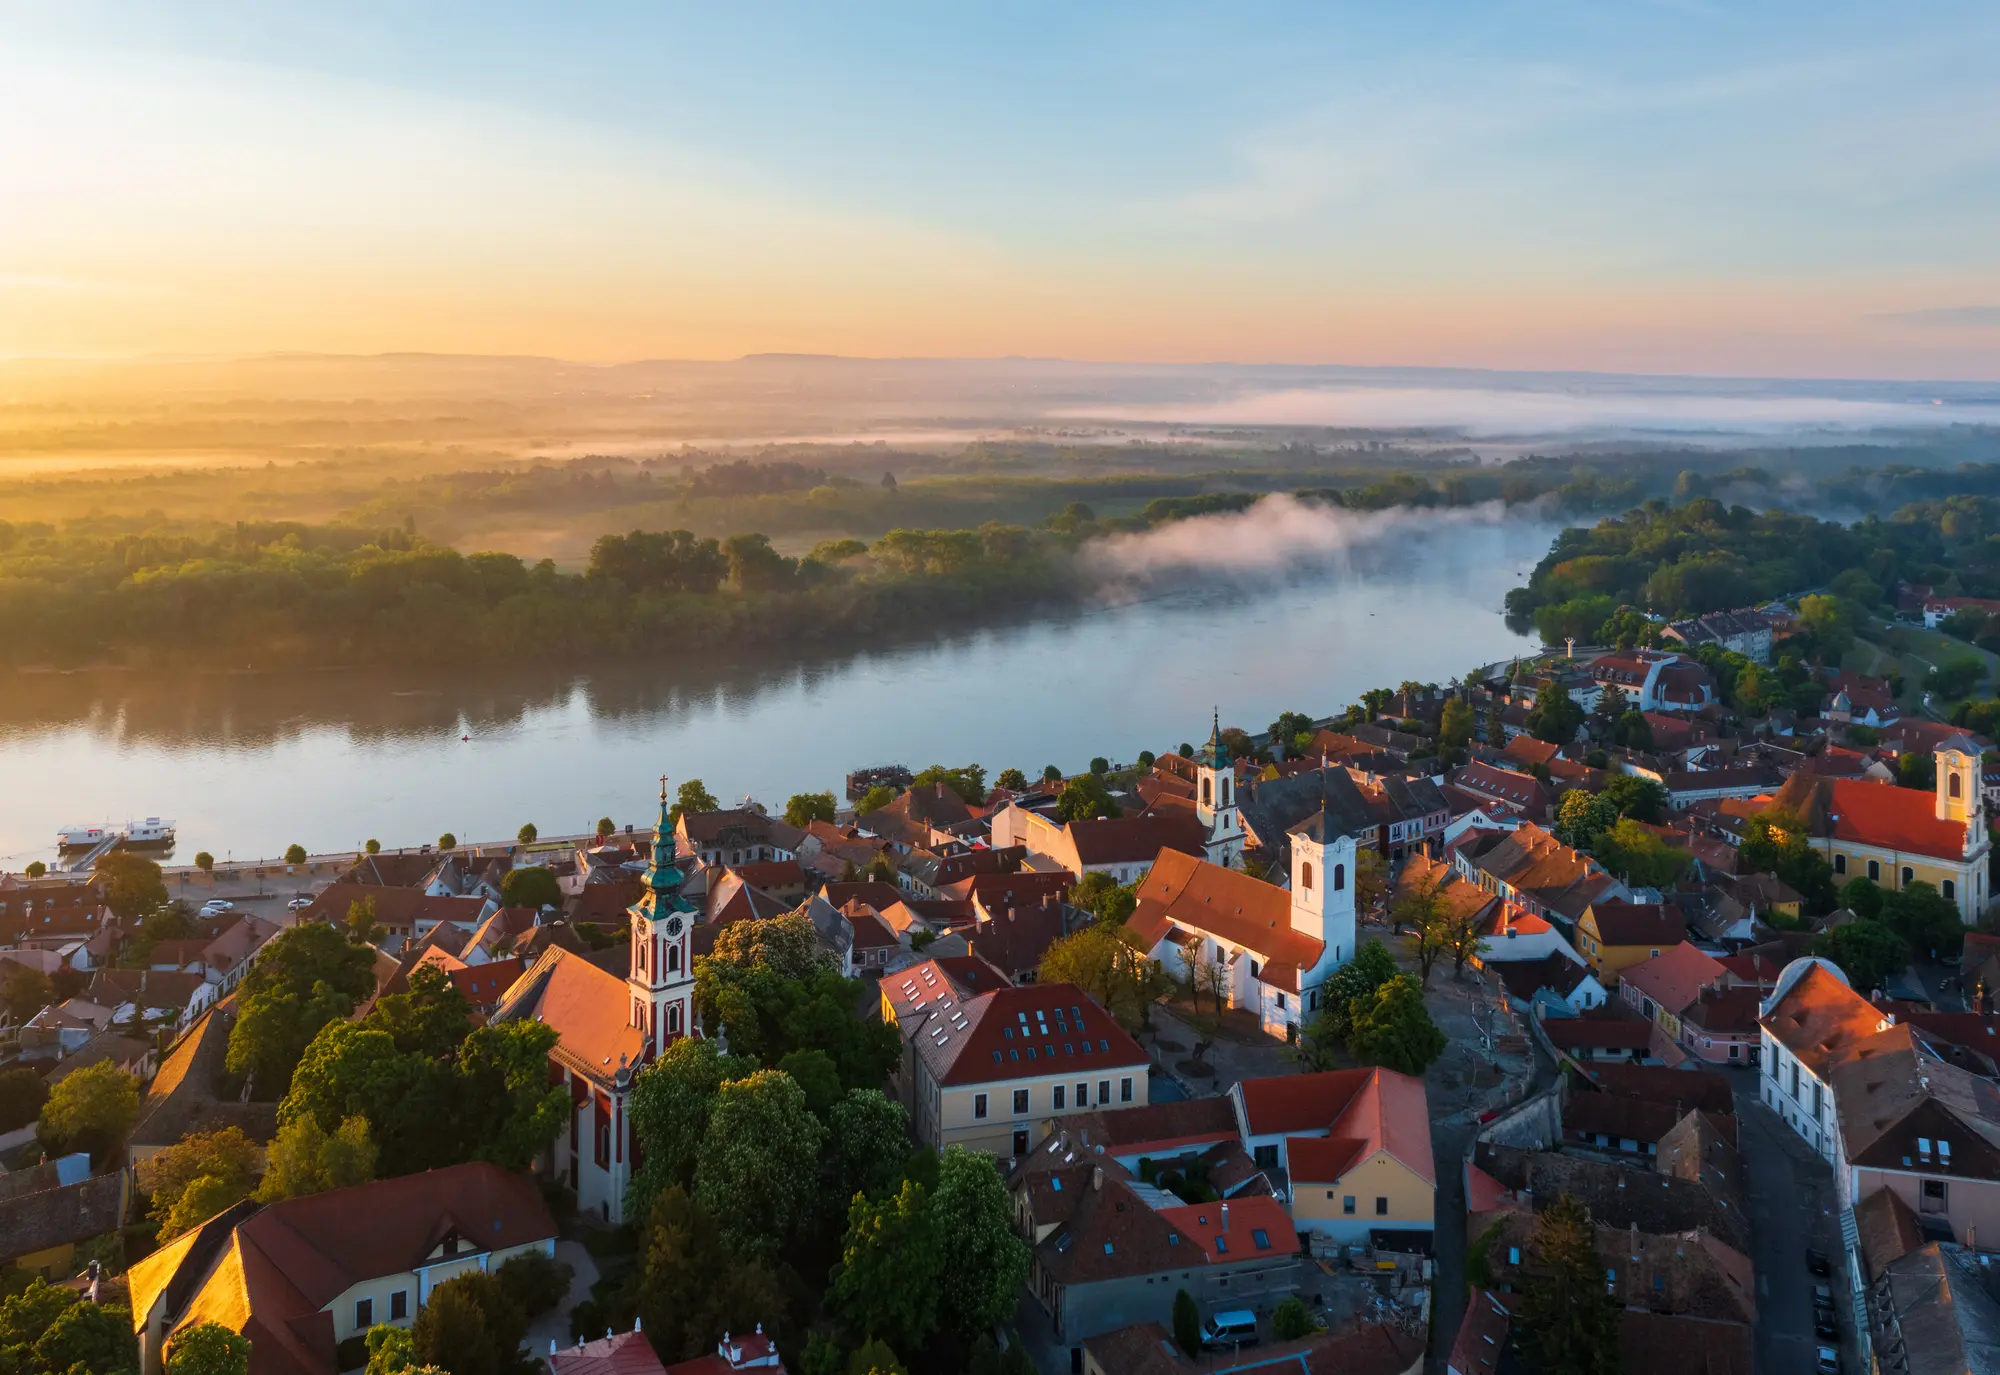 Small town of Szentendre in Hungary set around two white churches with orange roofs by the Danebu river at sunset, a hidden gem near Budapest.